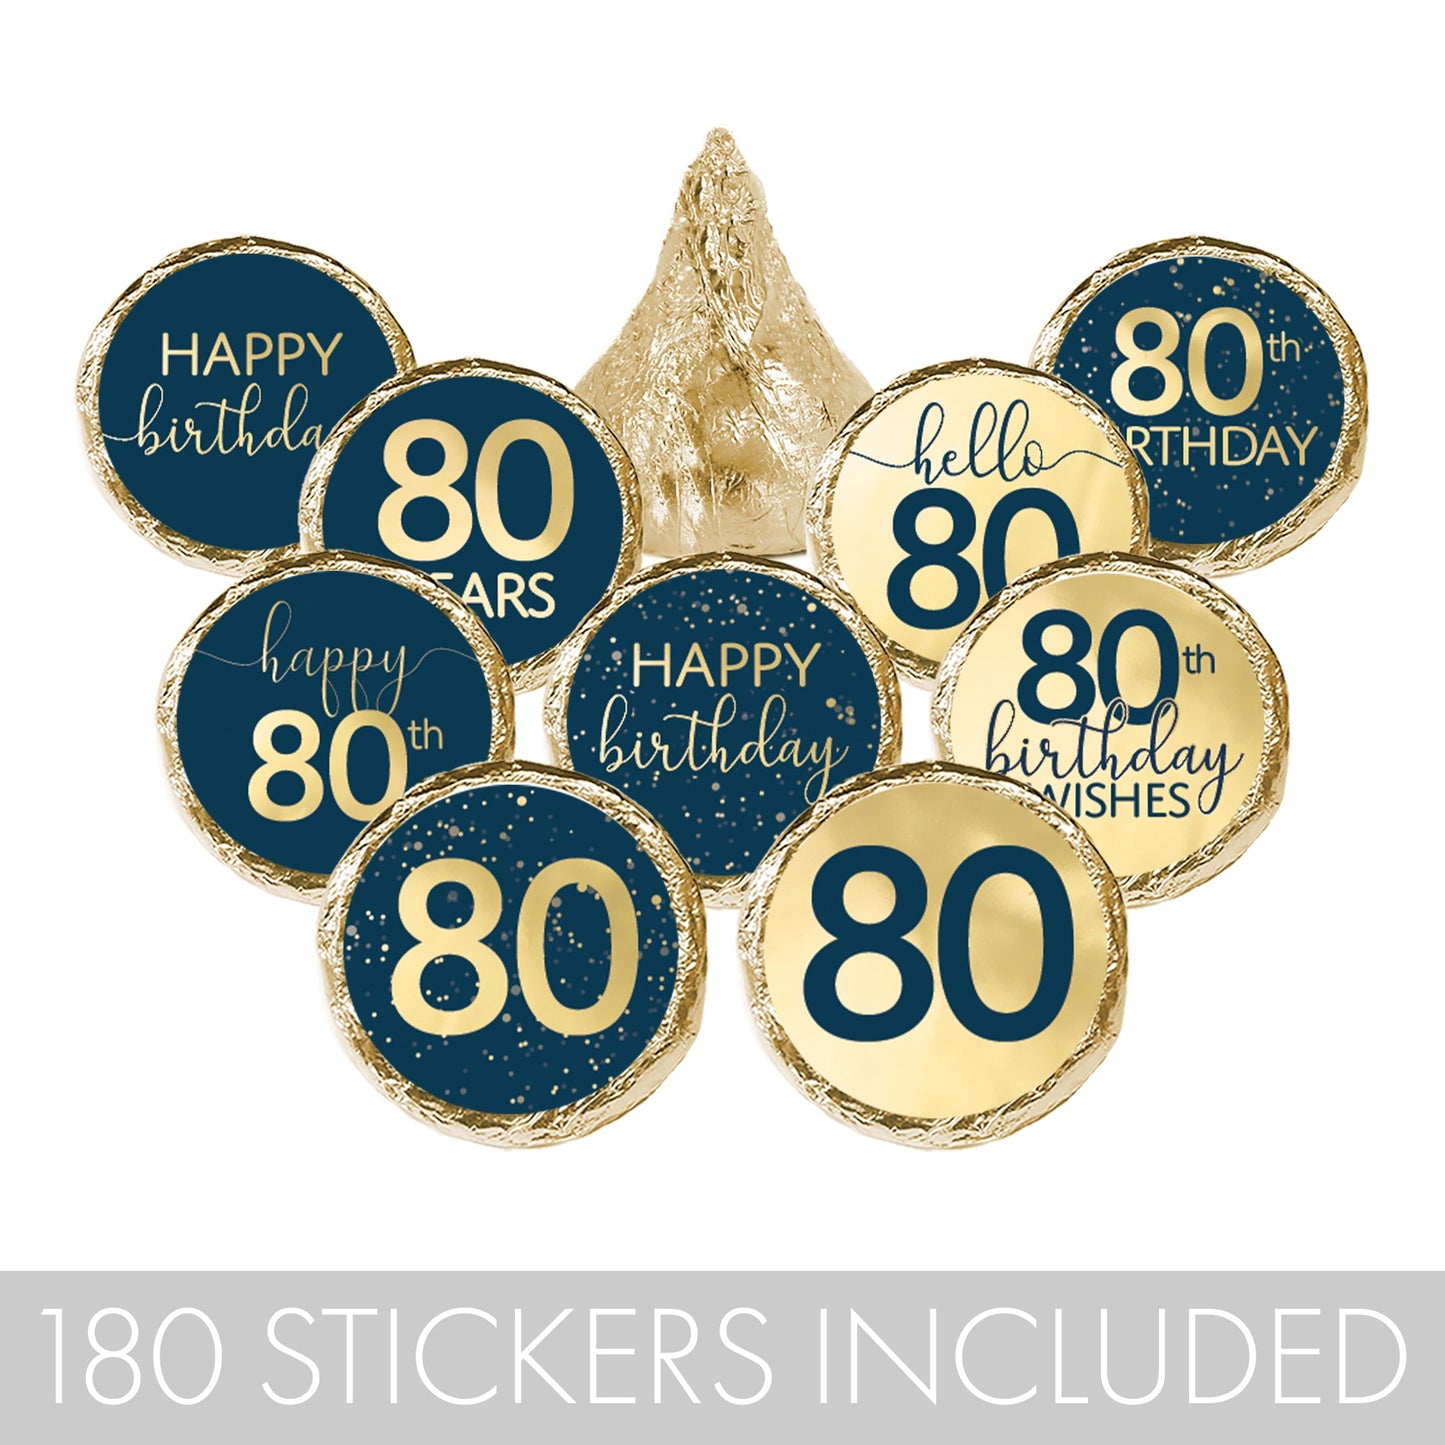 happy 80th Hersheys Kisses stickers with a navy blue and gold foil design